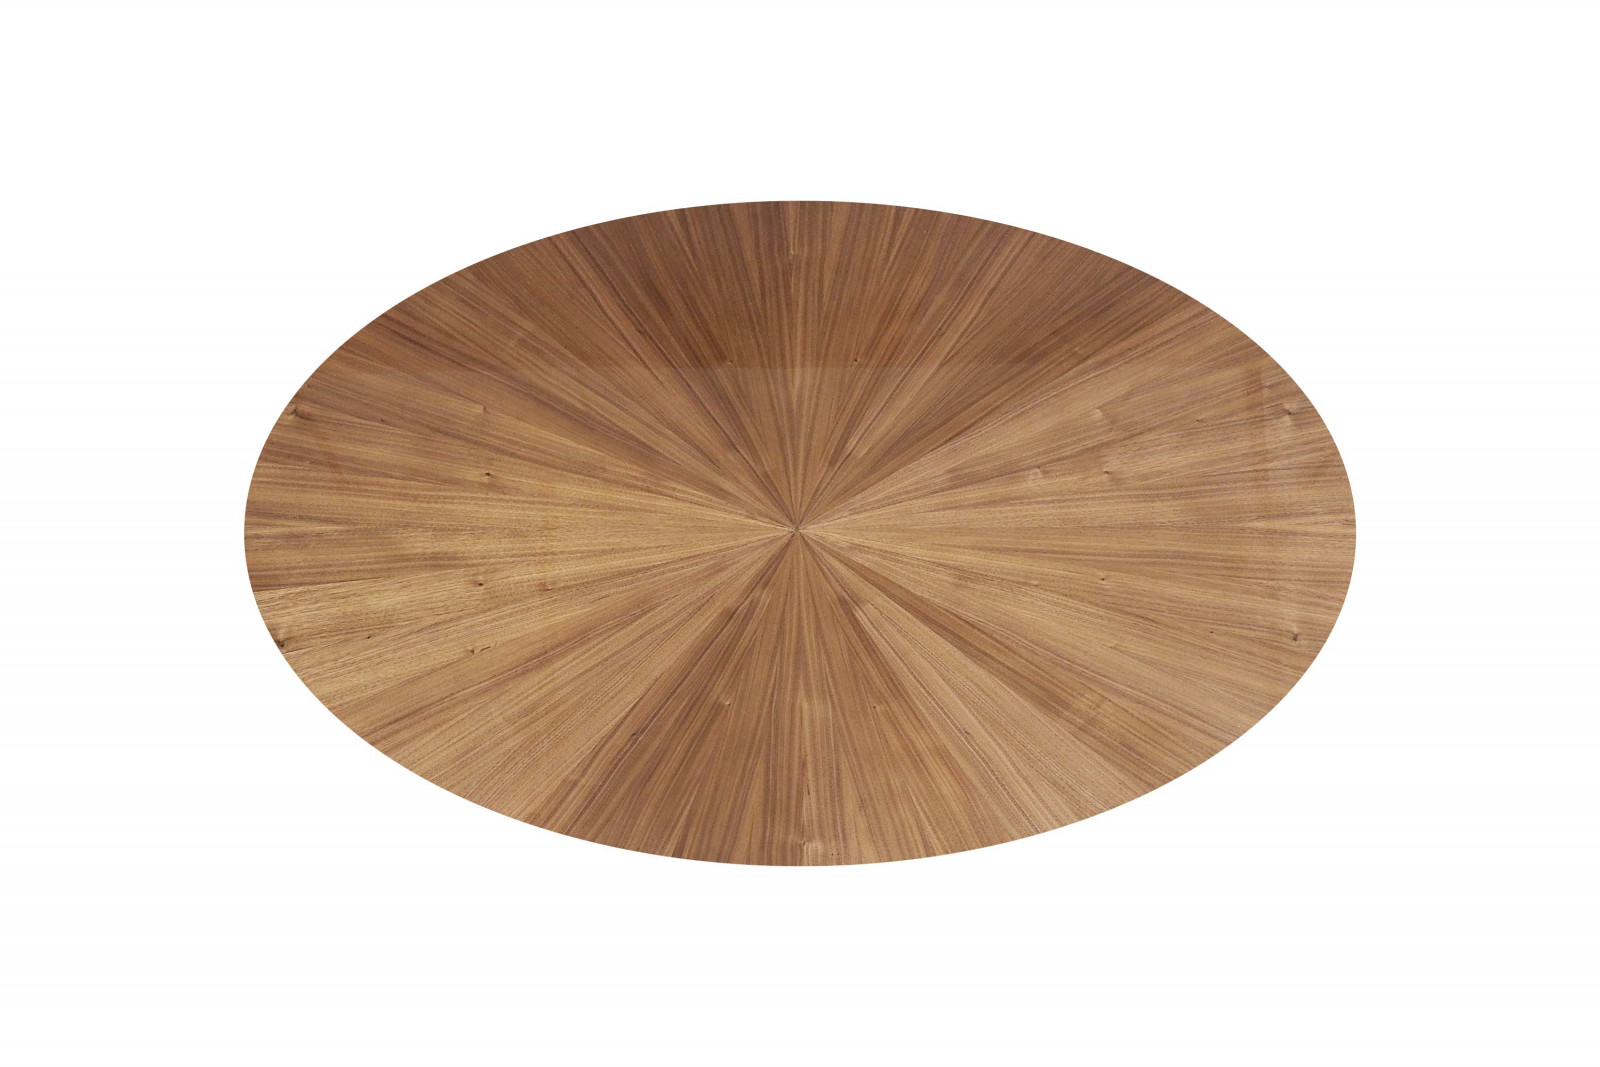 coffee_center_table_exclusive_luxurious_sculptural_roots_bronze_walnut_oval_allana_karpa_3-2291-1600-1400-100